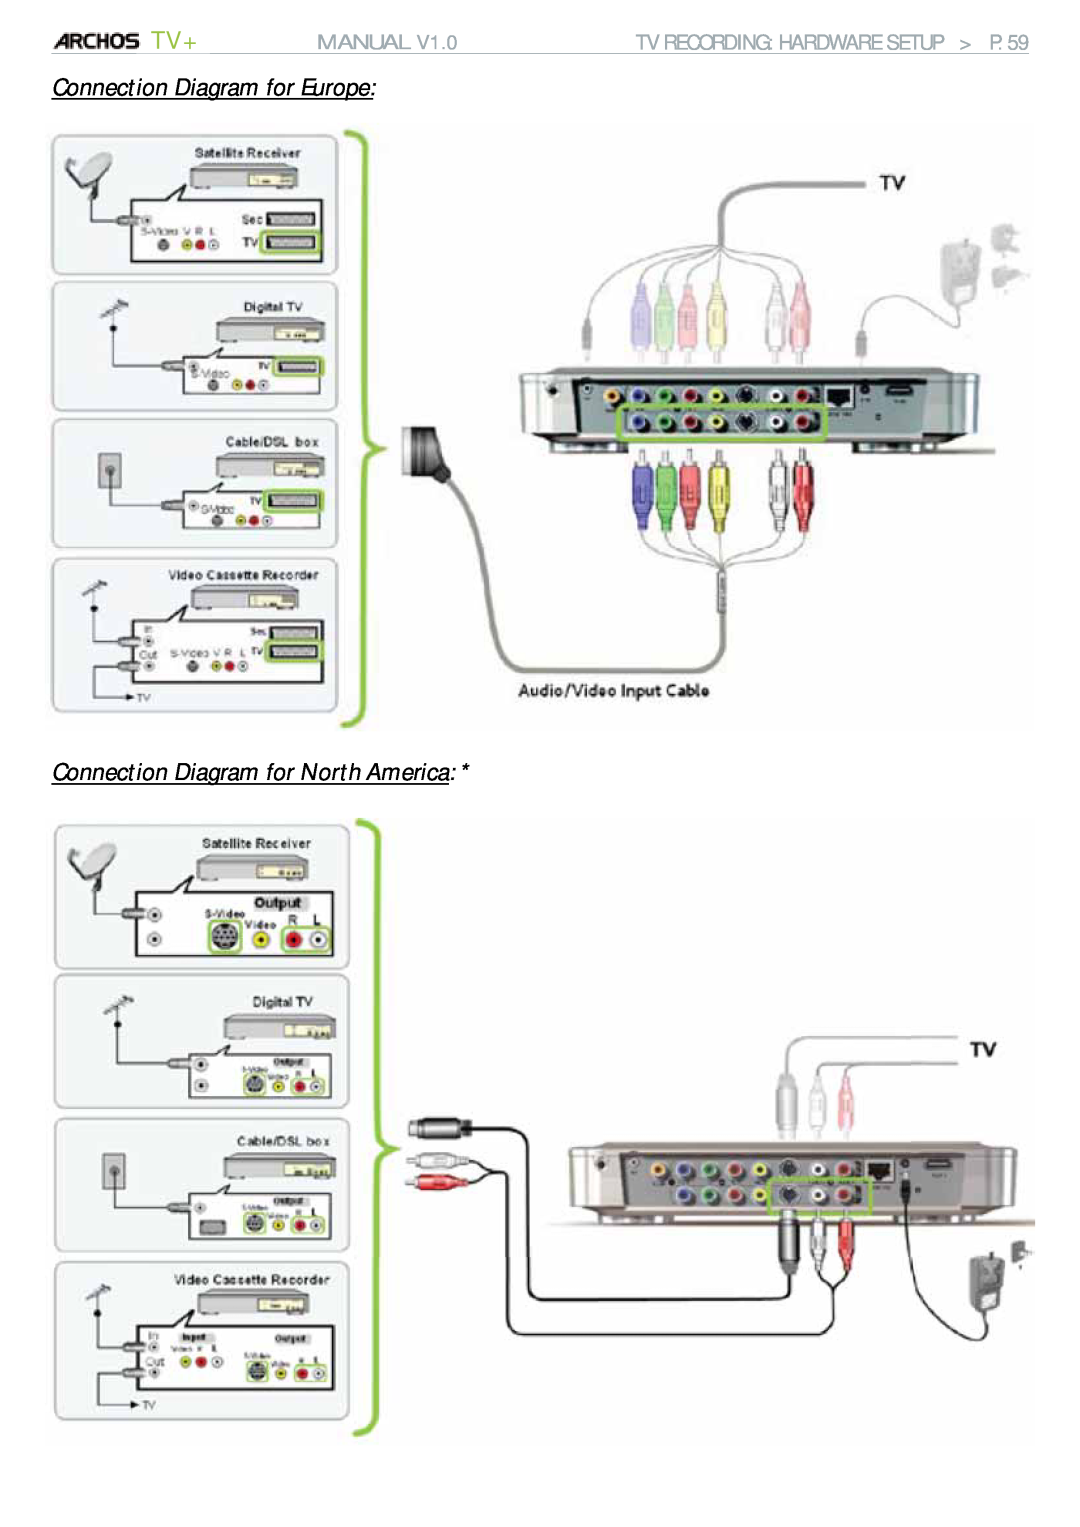 Archos 500973 Connection Diagram for Europe Connection Diagram for North America, Manual, Tv Recording Hardware Setup P 